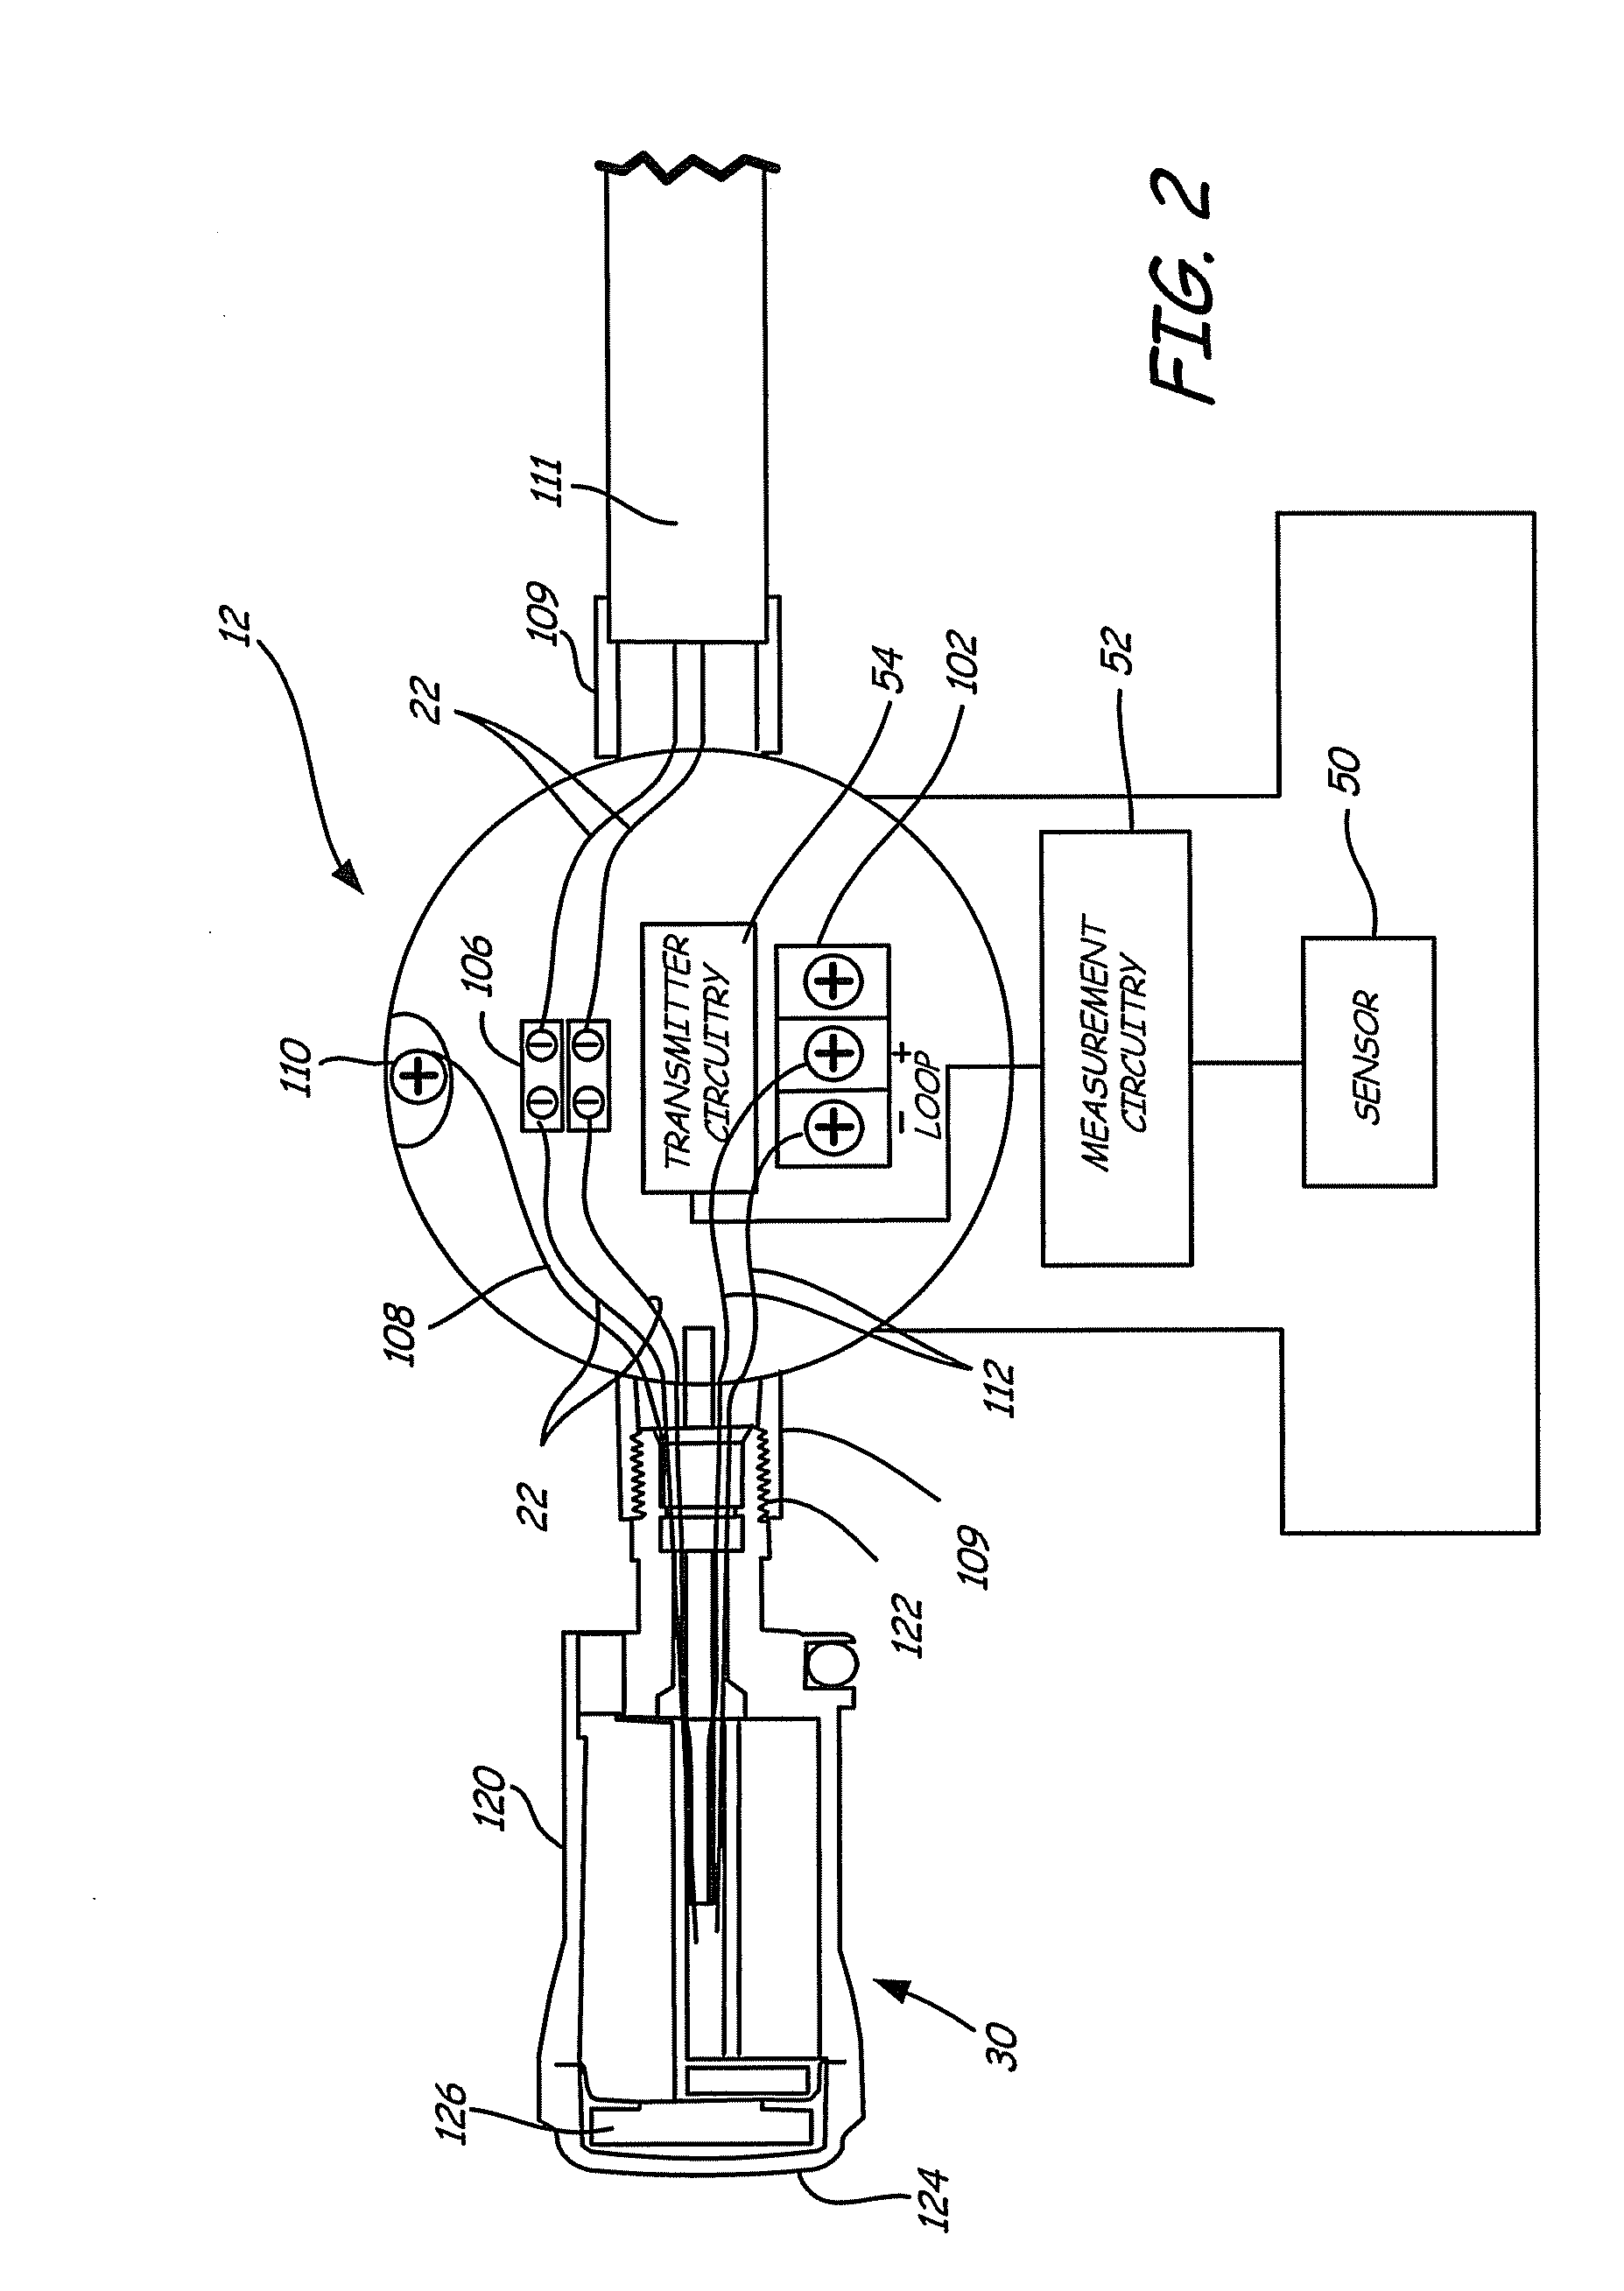 RF adapter for field device with variable voltage drop